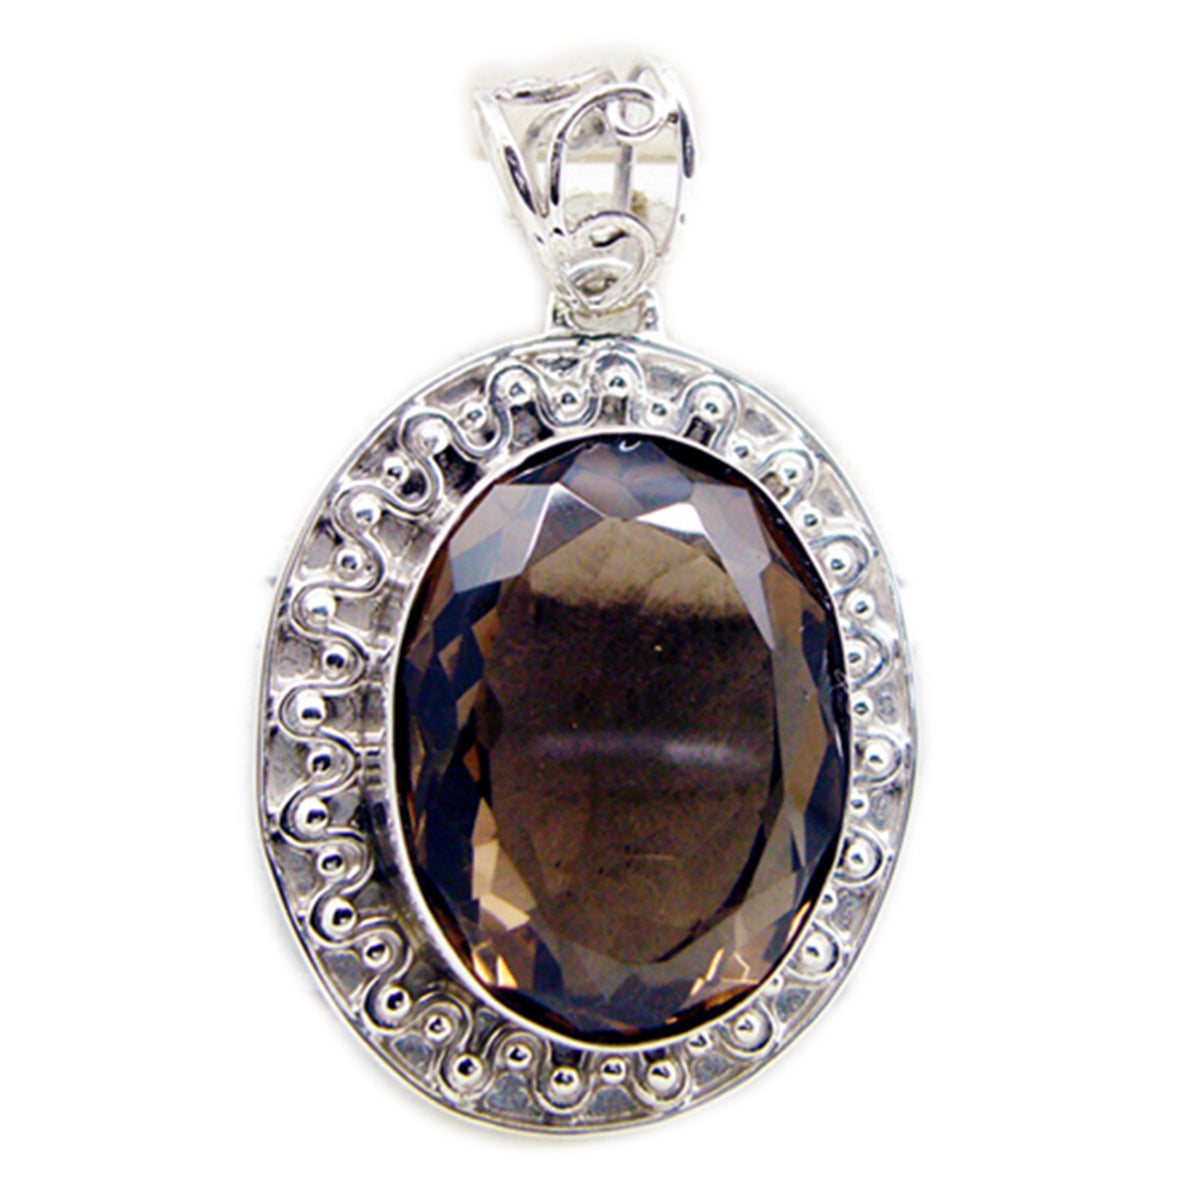 Riyo Nice Gemstone Oval Faceted Brown smoky quartz Solid Silver Pendant gift for good